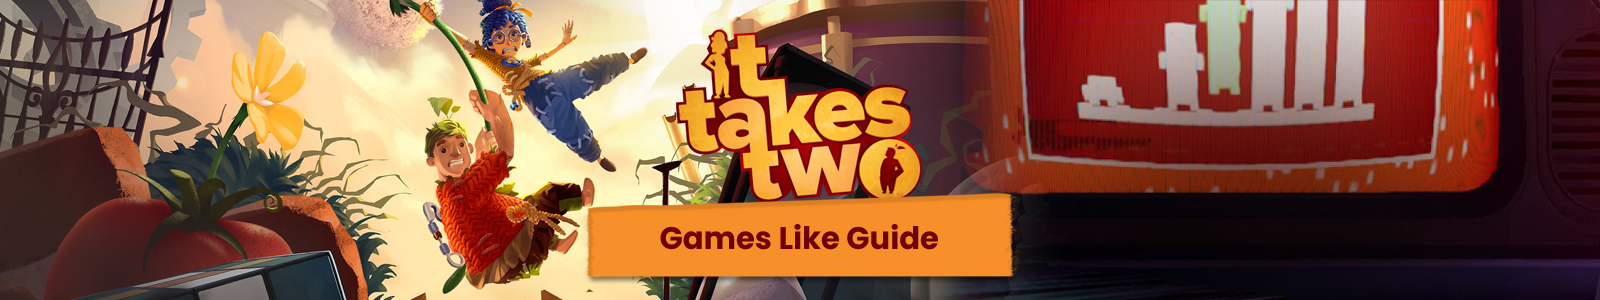 It Takes Two Spiele wie Anleitung